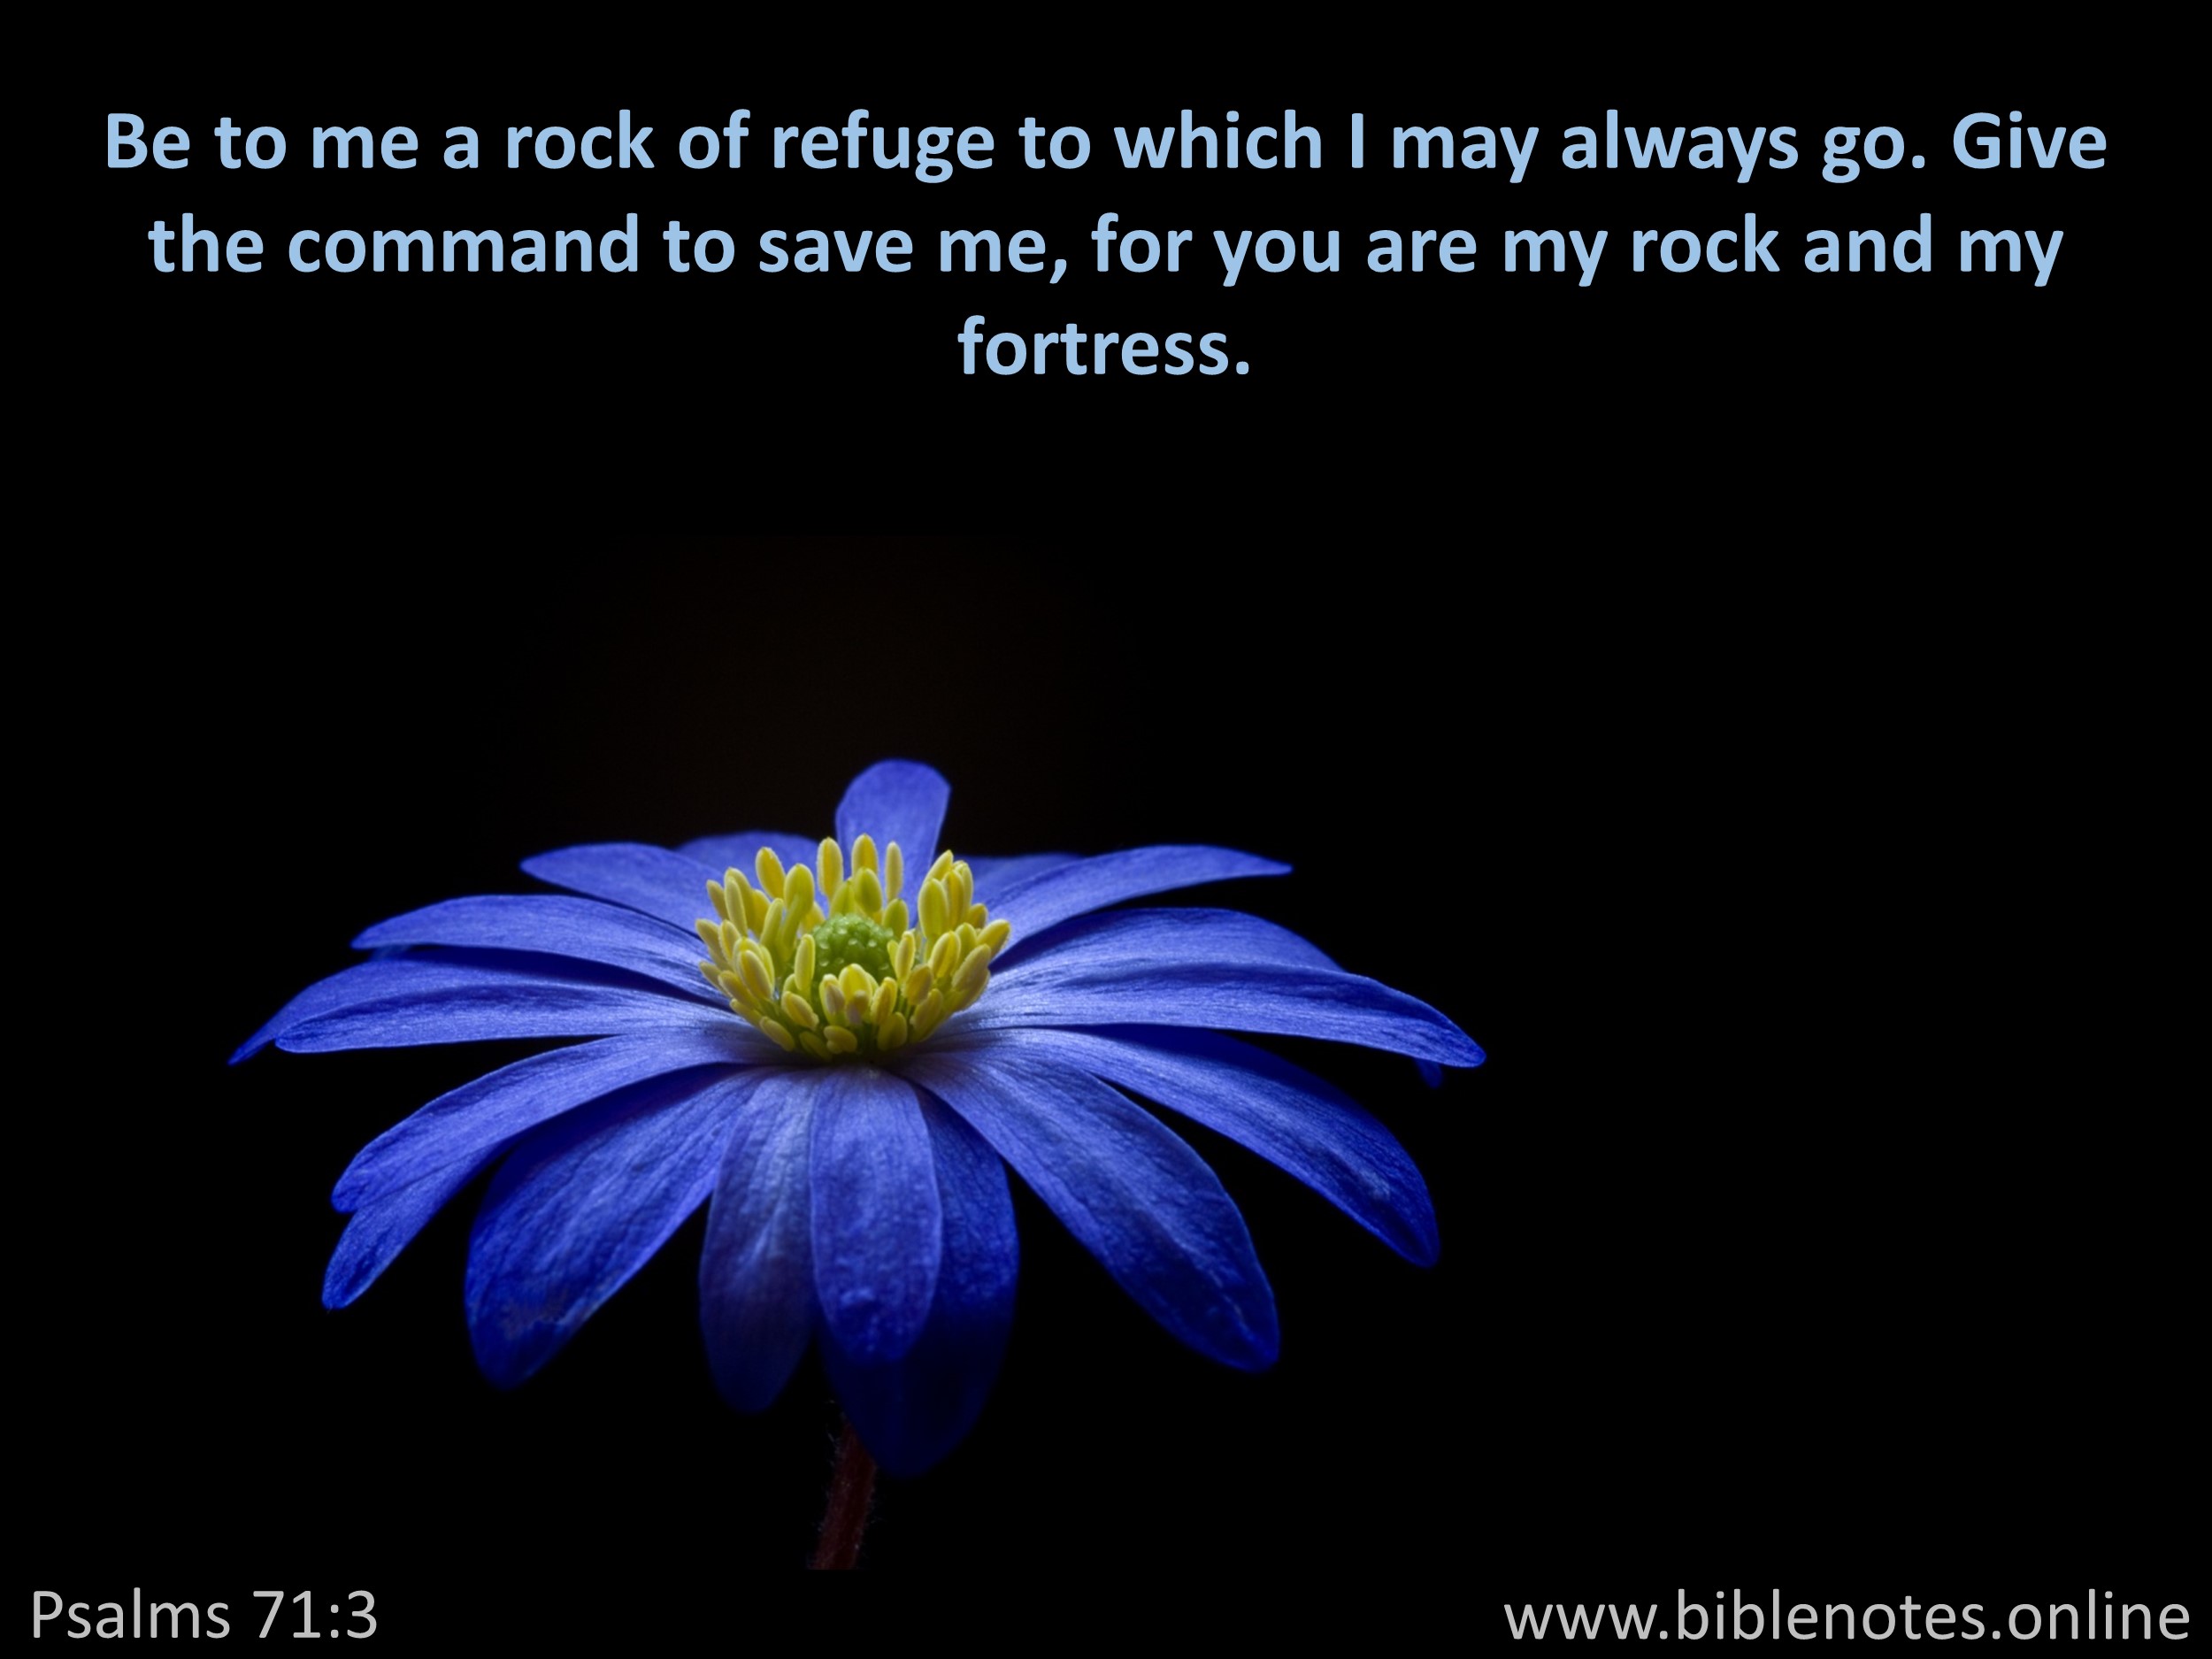 Bible Verse from Psalms Chapter 71